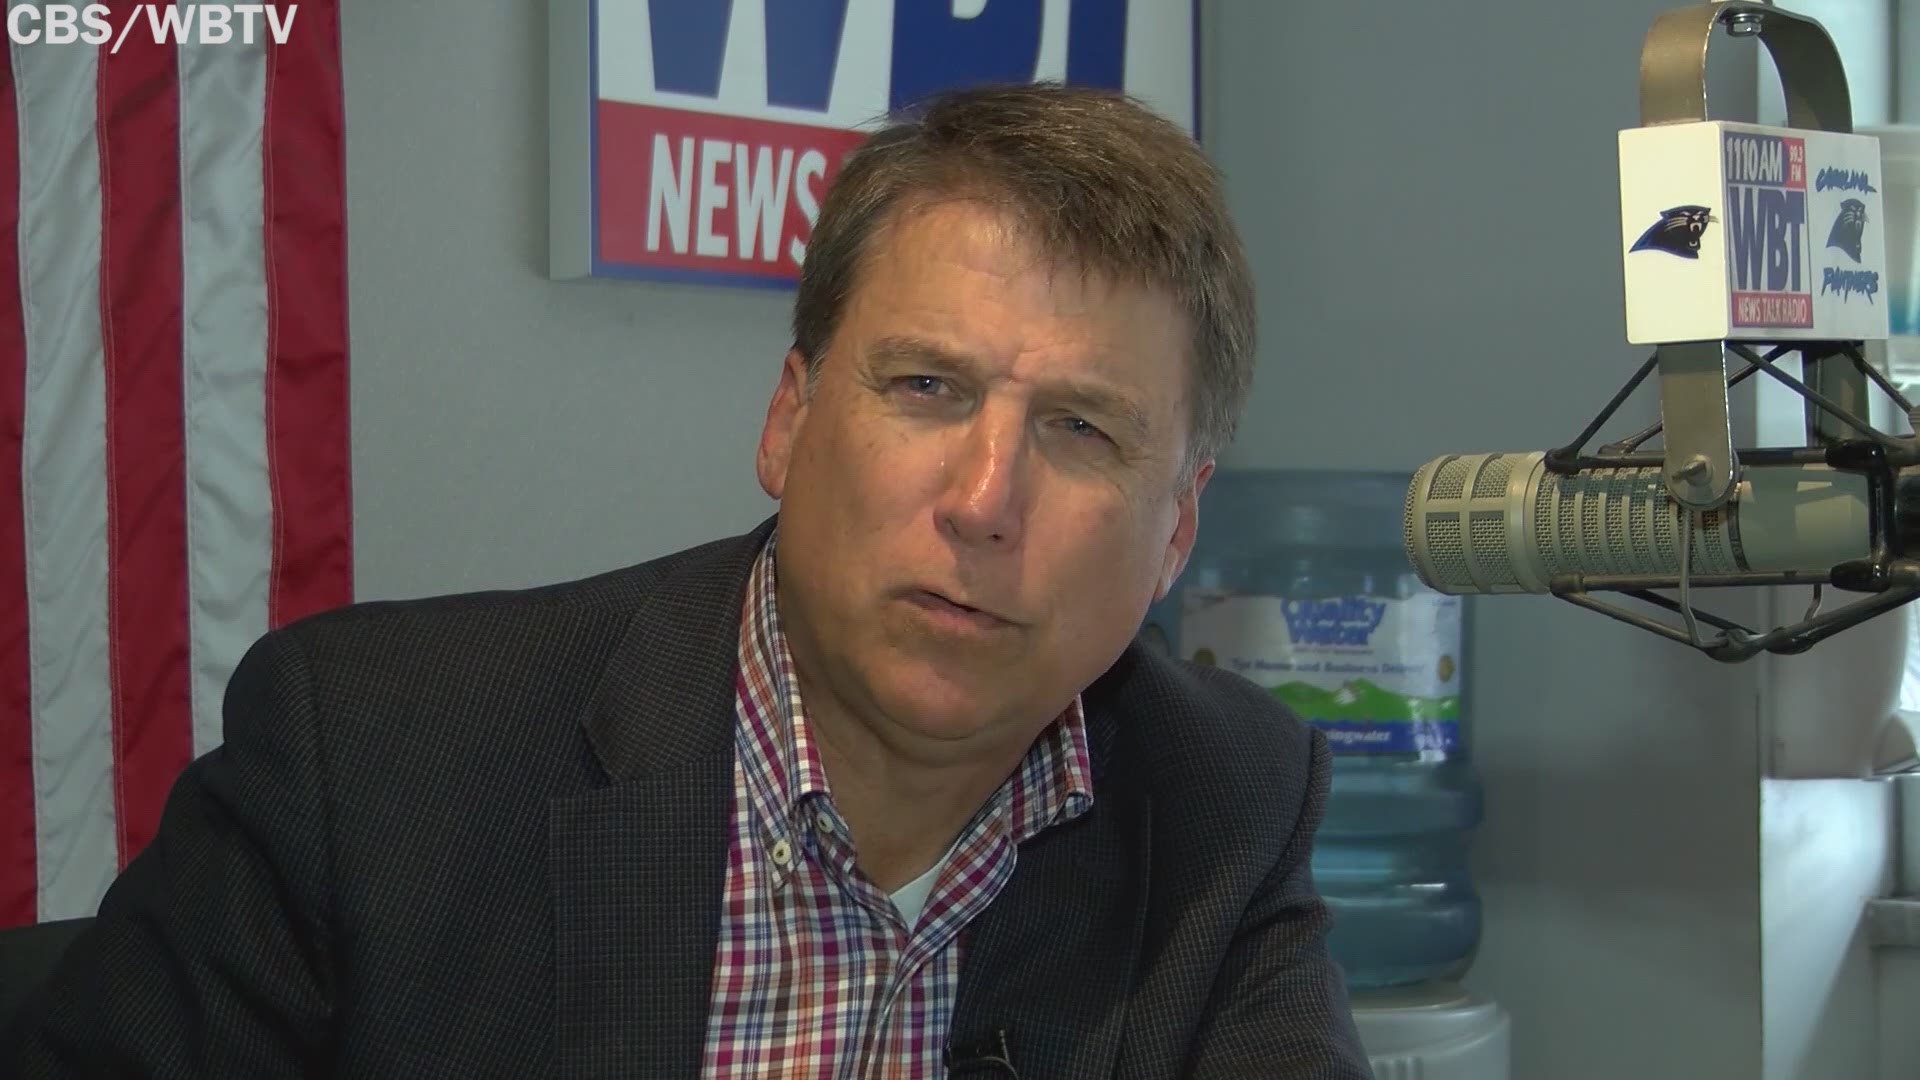 Former NC governor Pat McCrory talks candidly about controversial issues of his past and ponders another run for political office.